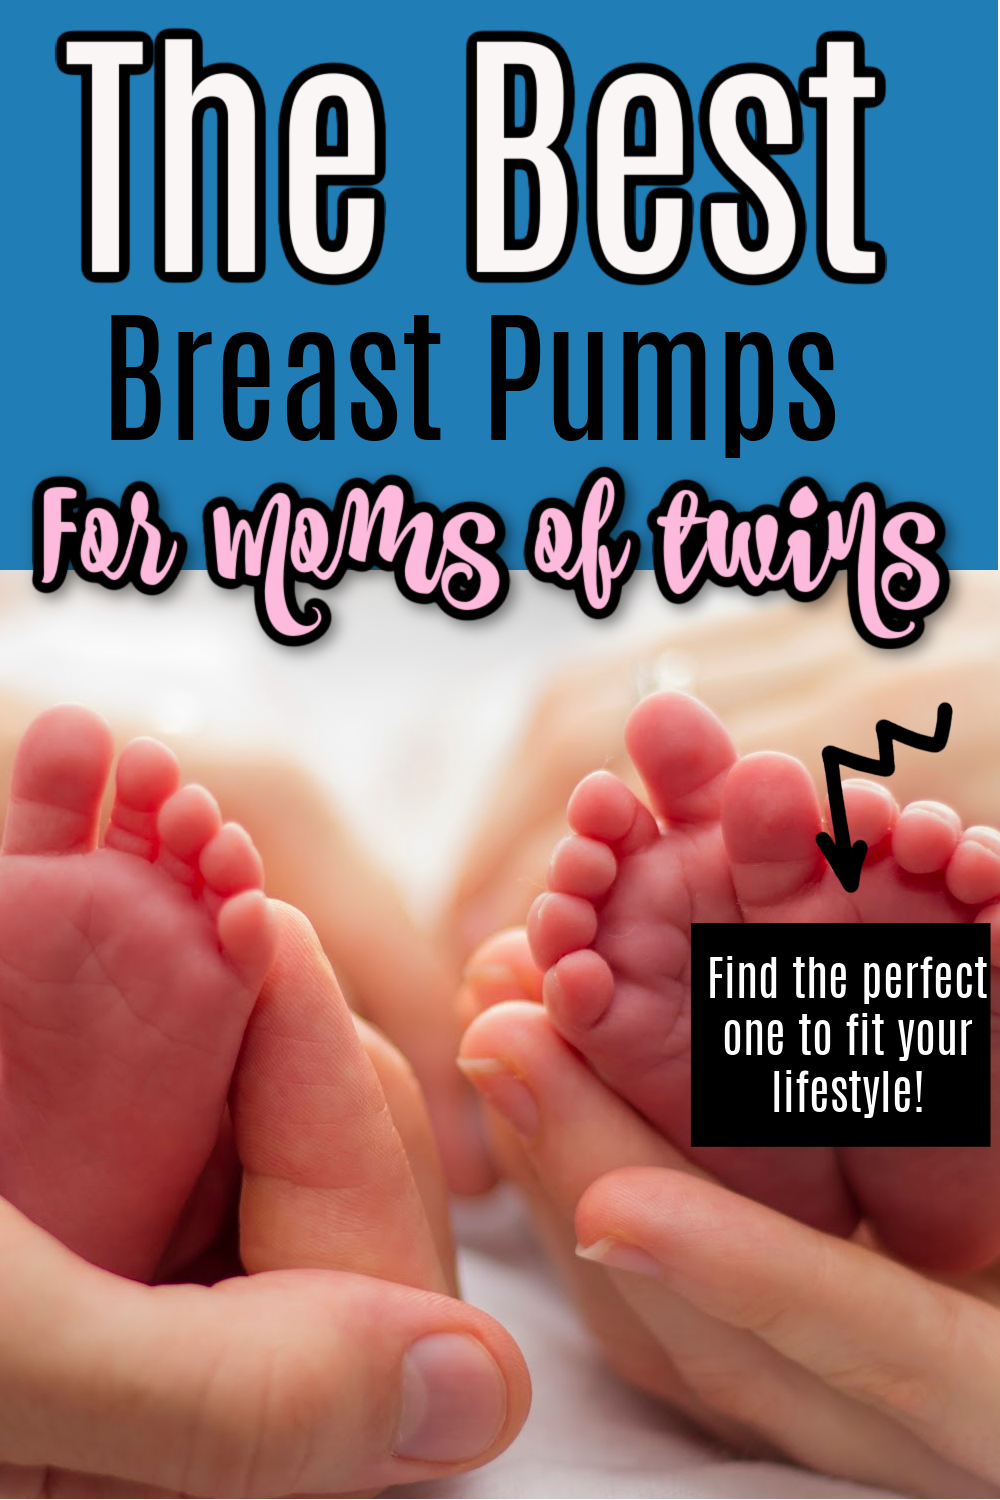 The Best Breast Pumps For Moms of Twins